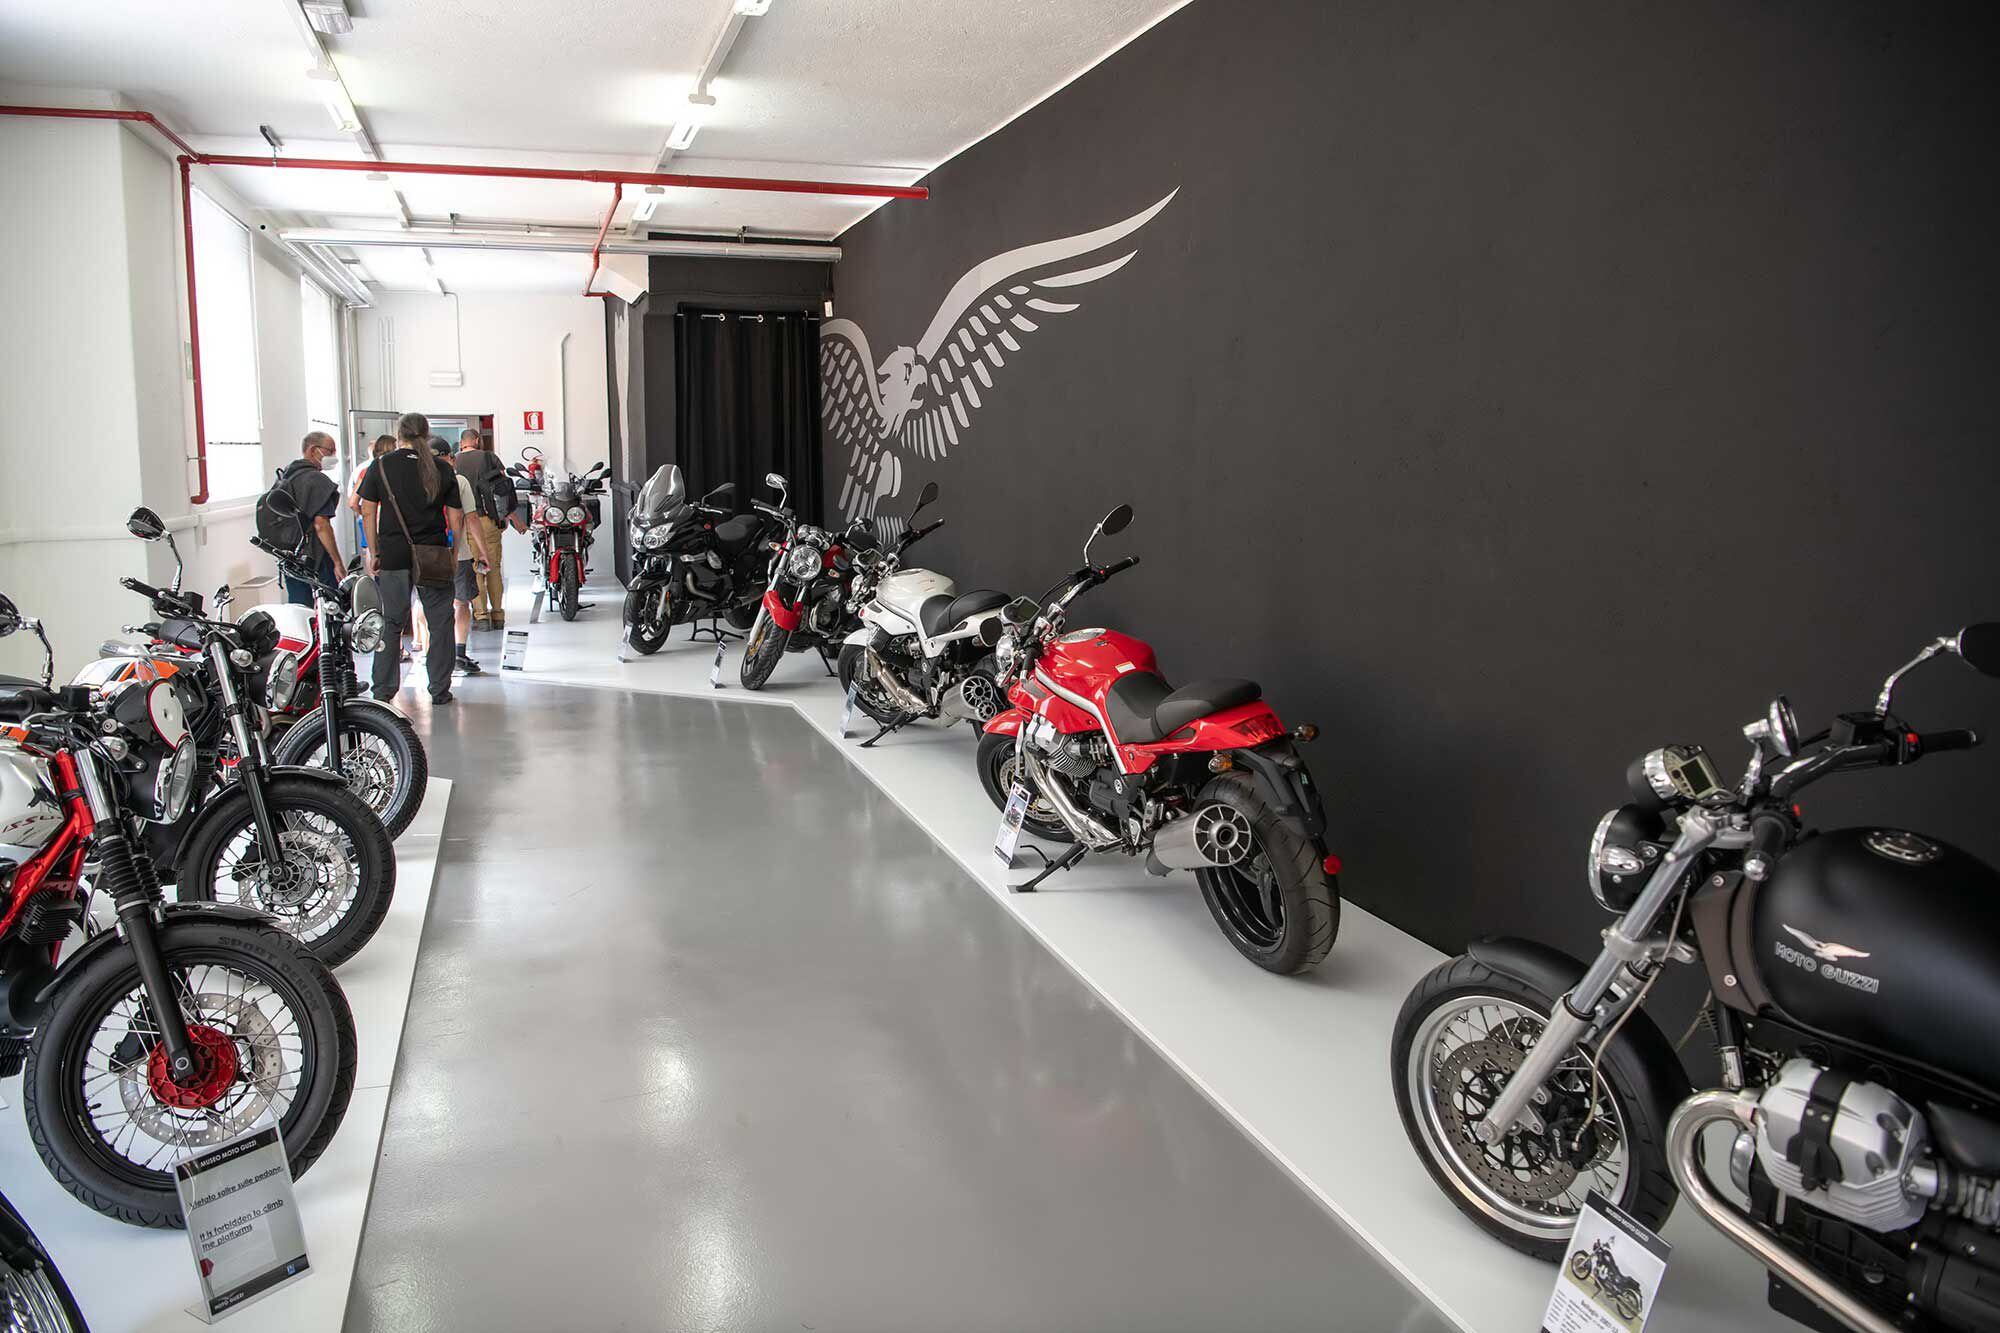 Everything in the new Guzzi museum is done beautifully, with impeccable Italian style. In this second-floor section, you’ll find bikes from 2000 to the present.